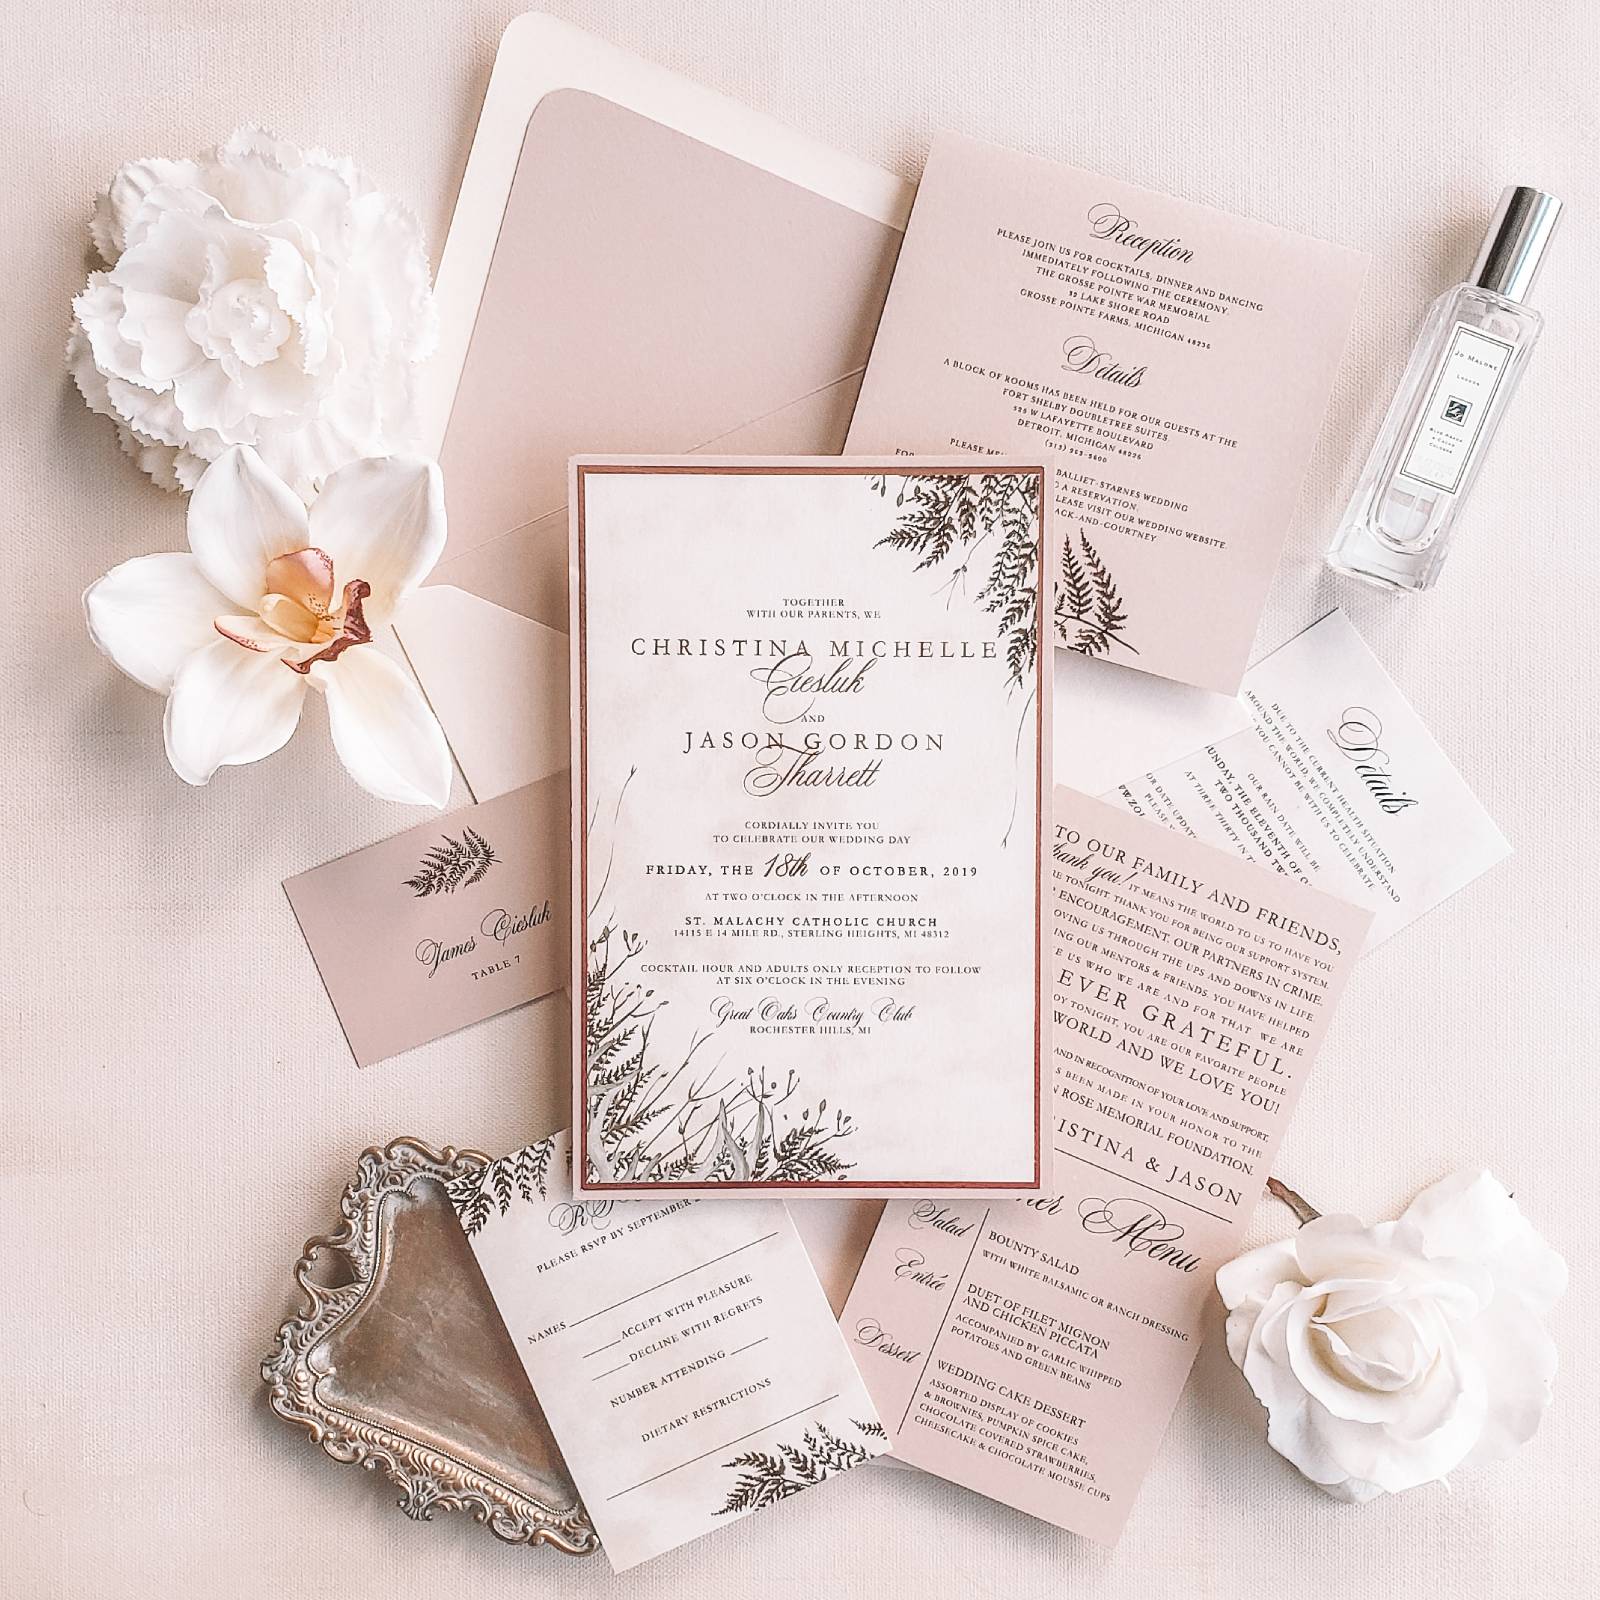 [vc_row][vc_column][vc_column_text]Purchase this listing to get a sample of our Albuquerque wedding invitation suite.

The sample includes:

• 5.5